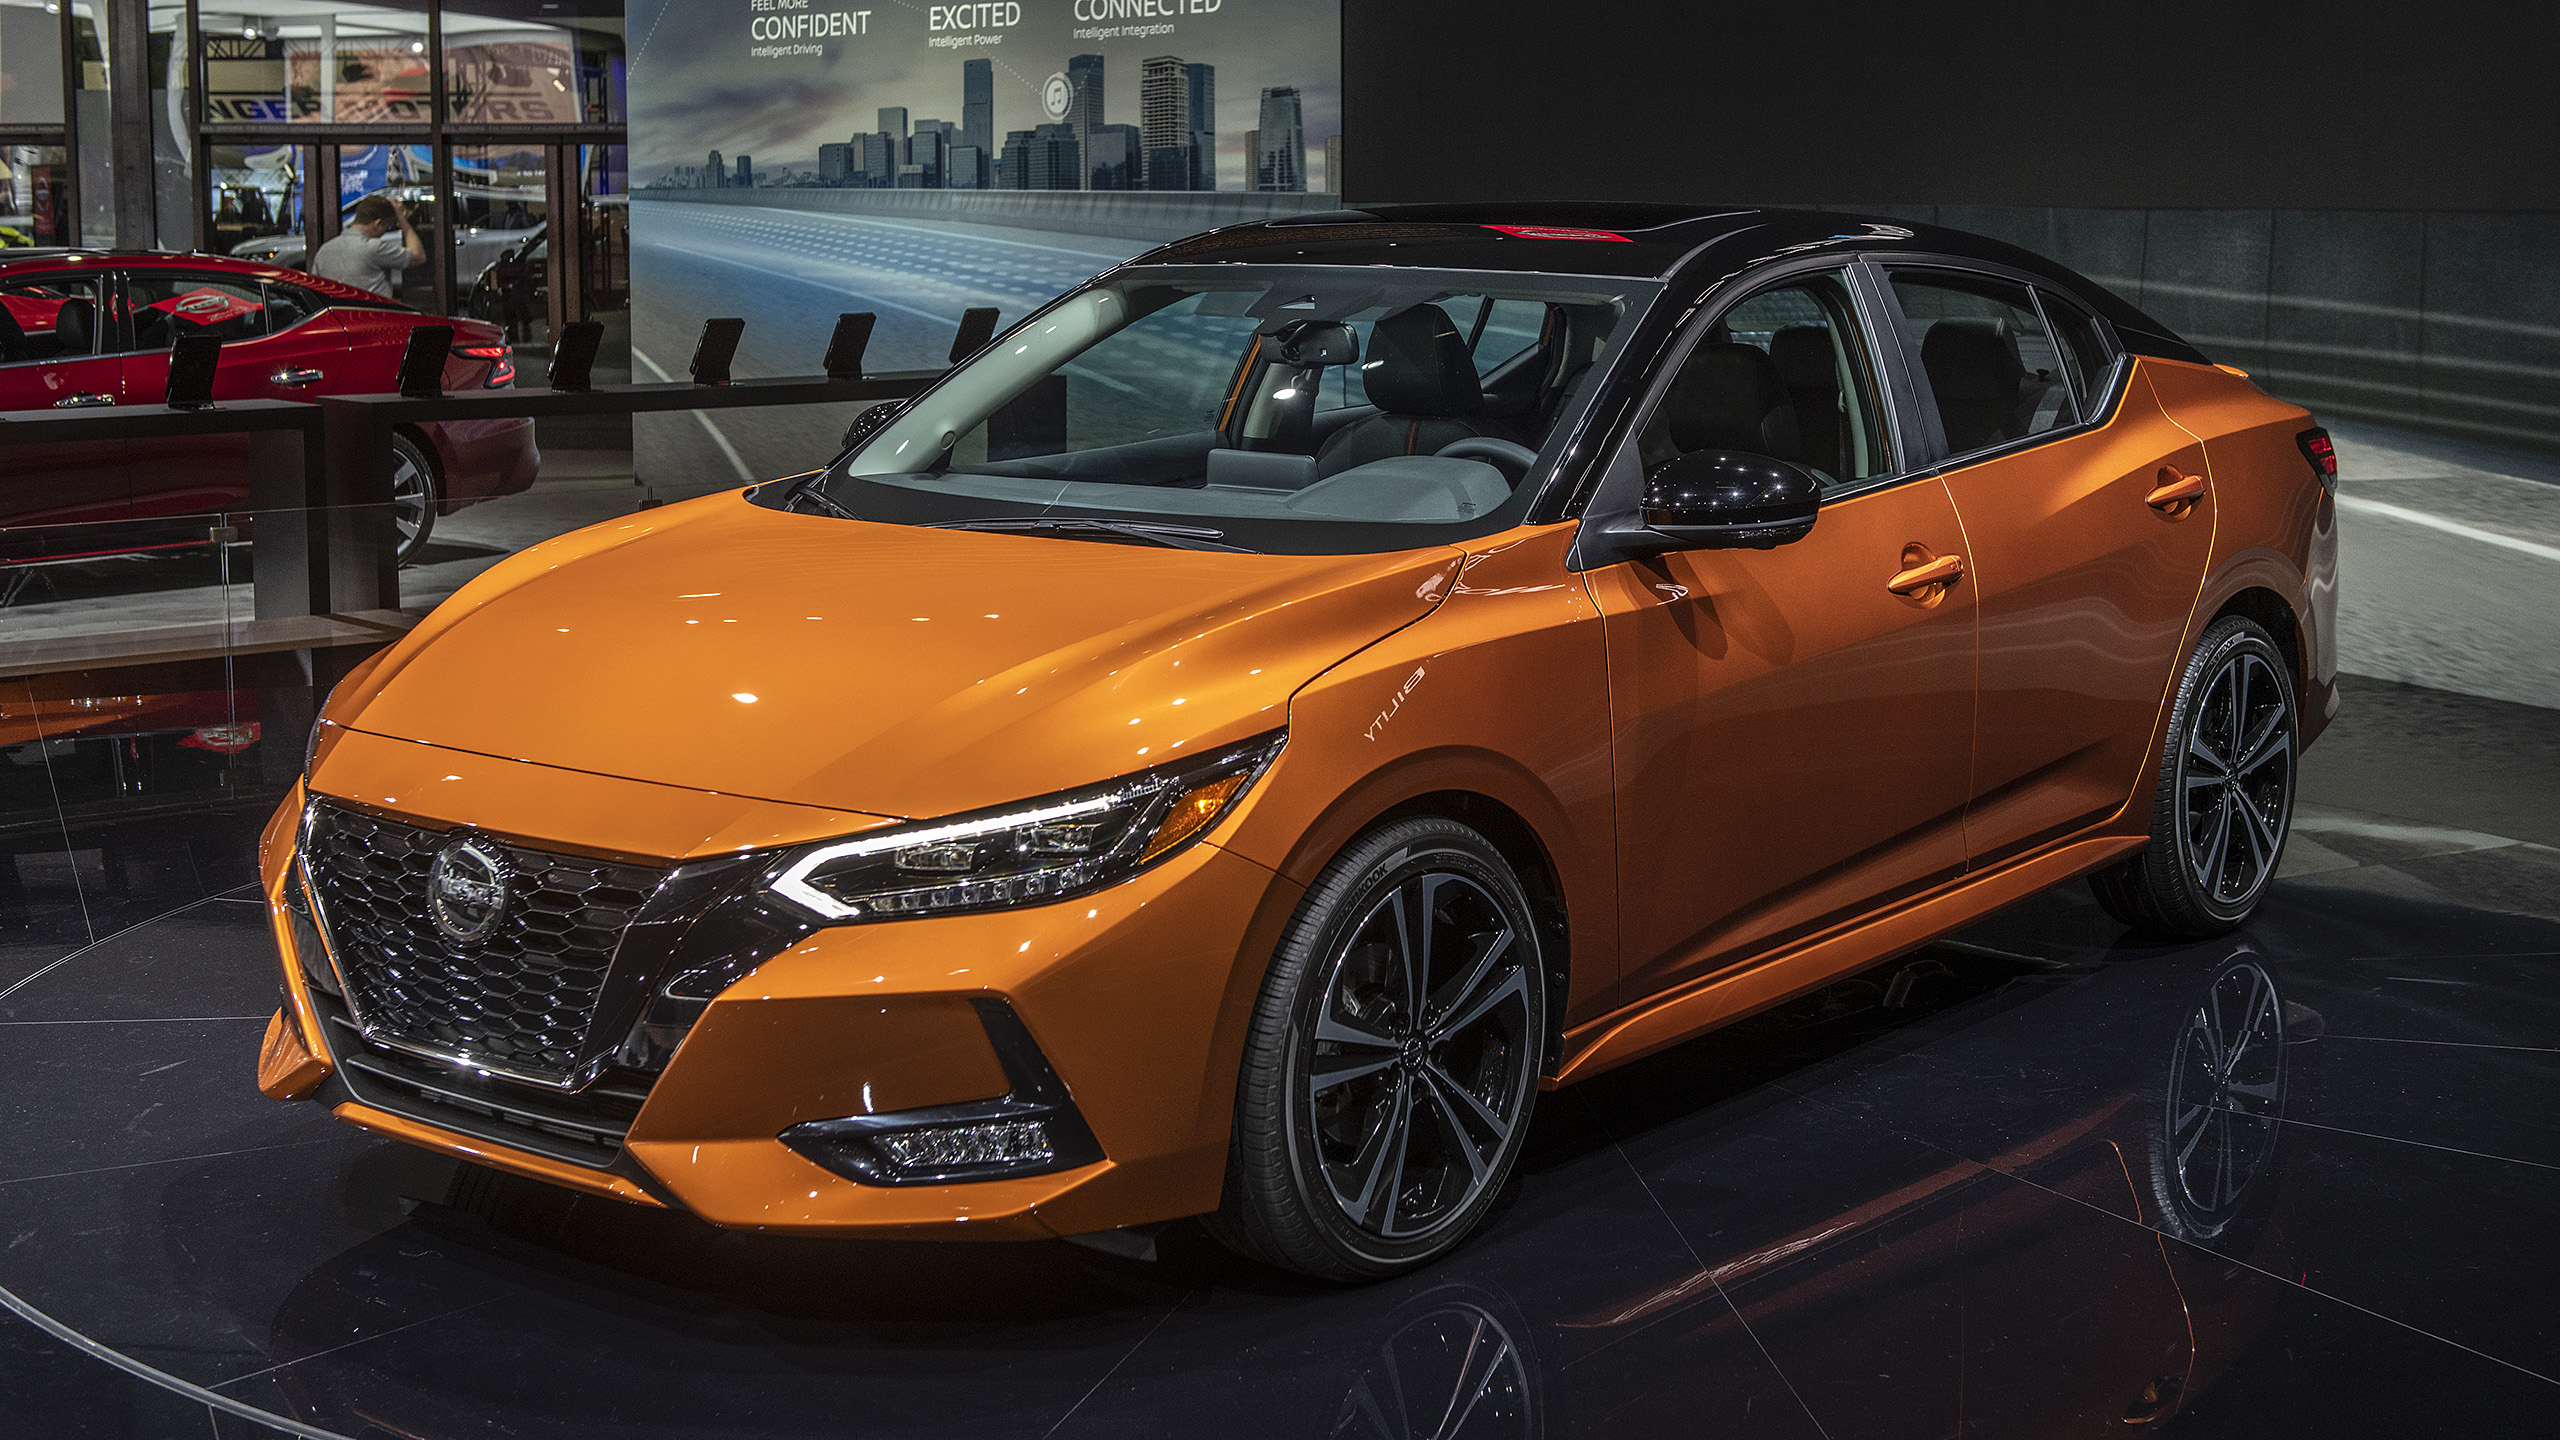 2020 Nissan Sentra gets more upscale with Maxima cues - Autoblog